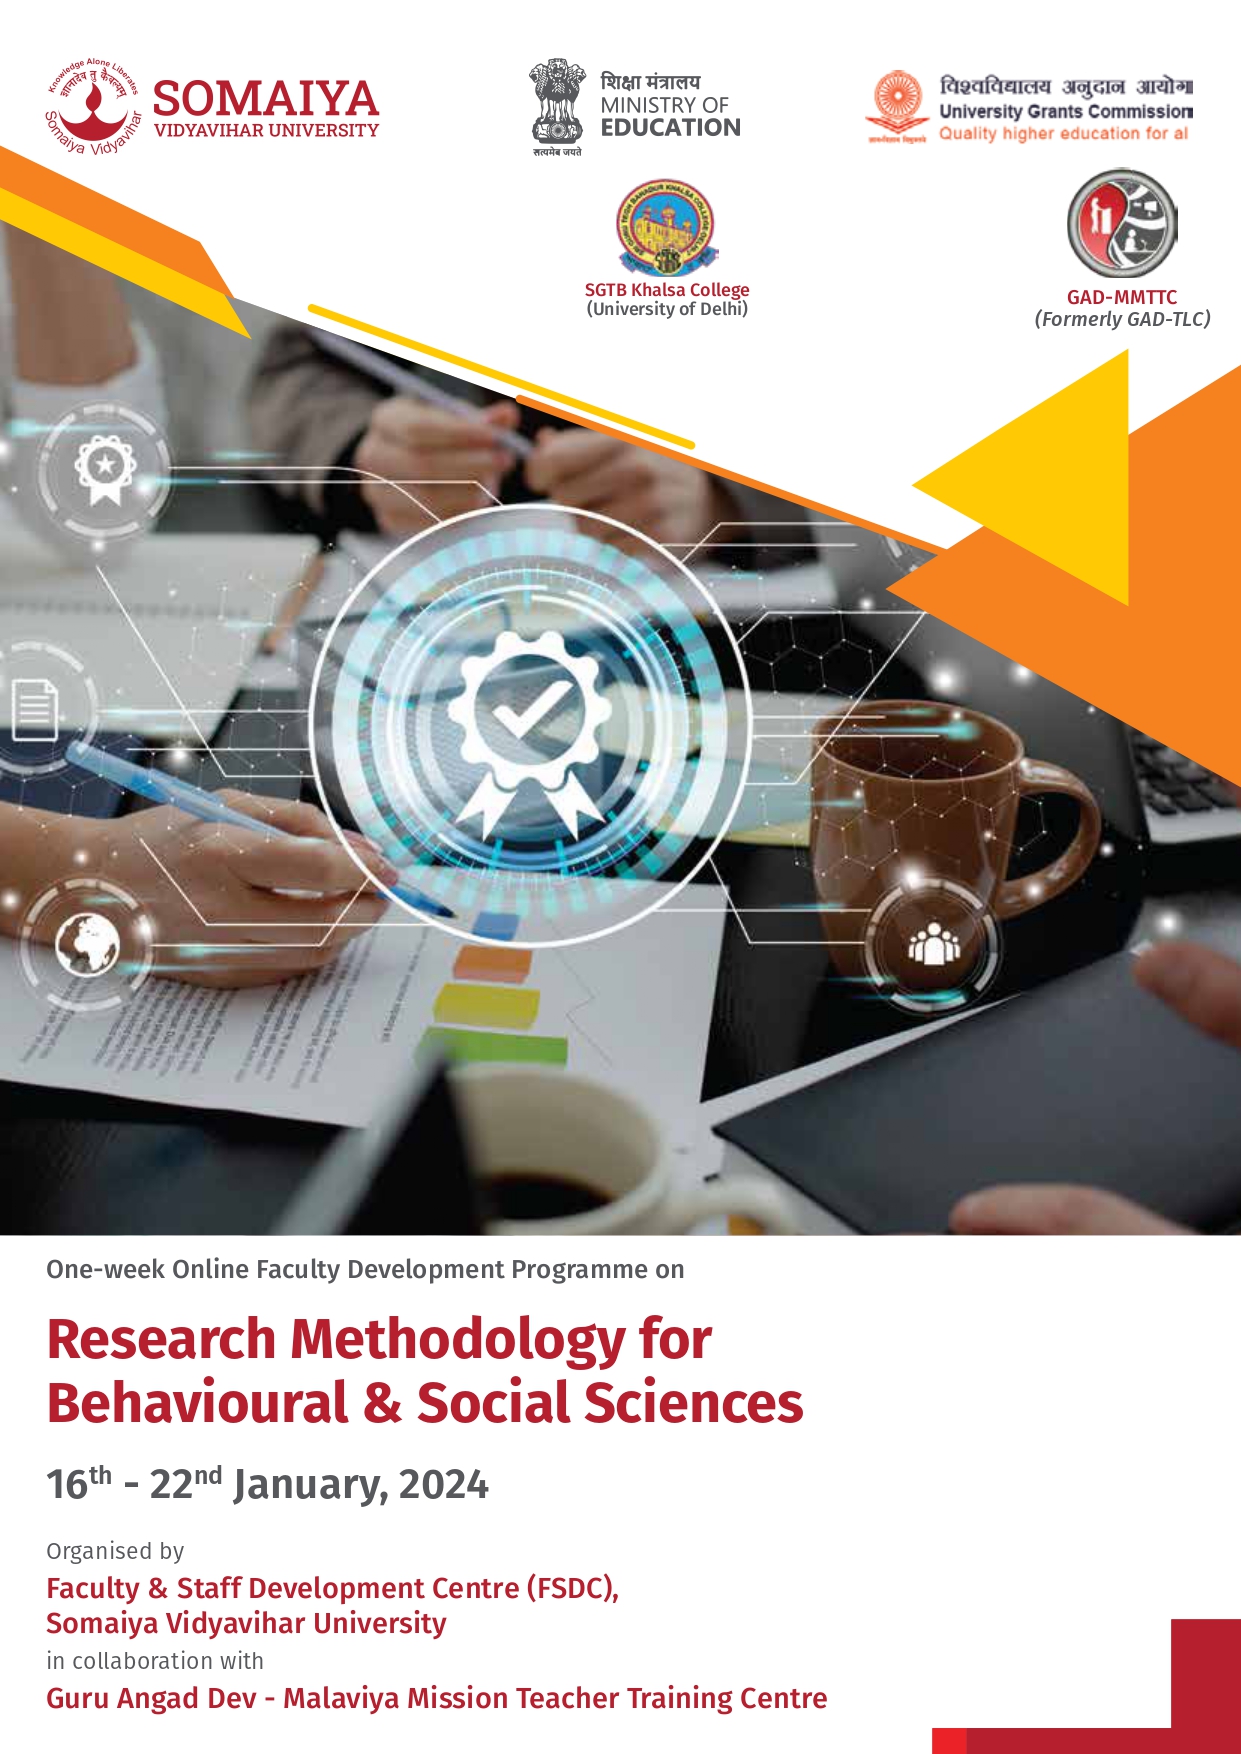 Course Image OFDP-170: Research Methodology for Behavioural & Social Sciences